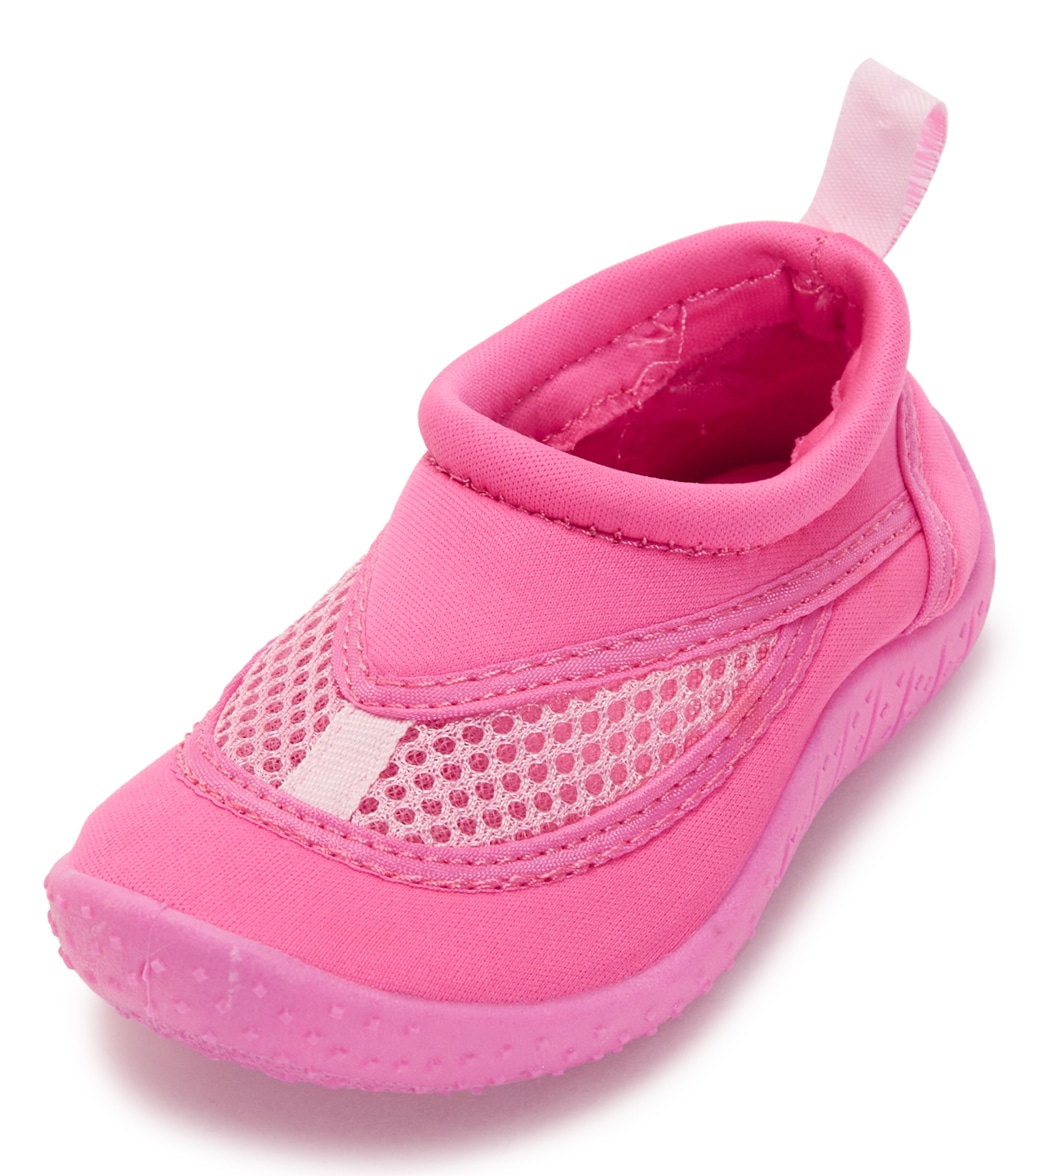 I Play. By Green Sprouts Kid's Swim Shoes - Hot Pink 4 - Swimoutlet.com